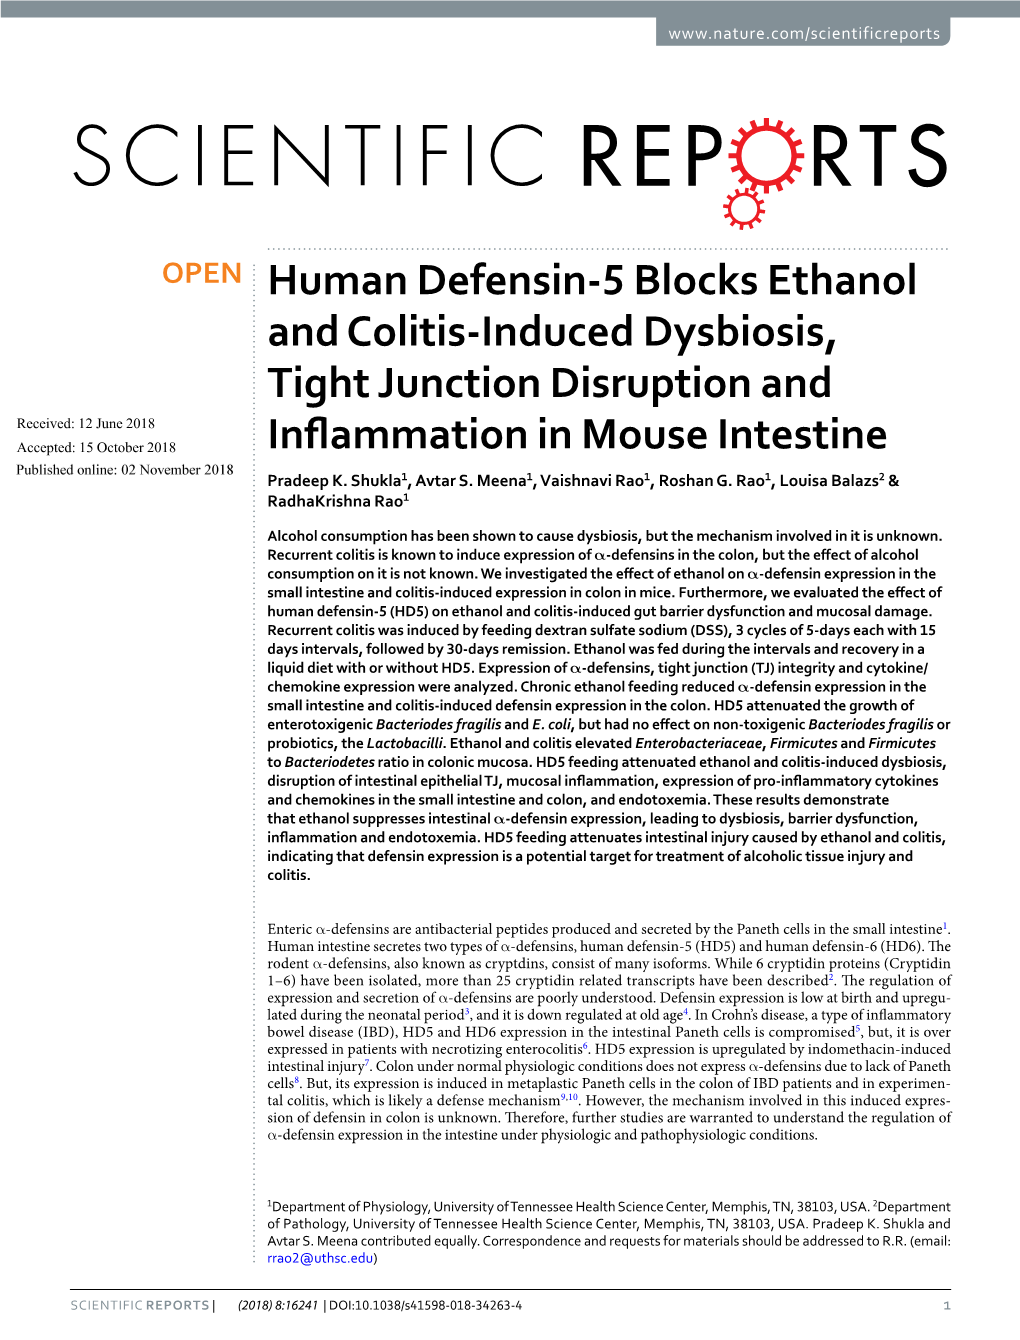 Human Defensin-5 Blocks Ethanol and Colitis-Induced Dysbiosis, Tight